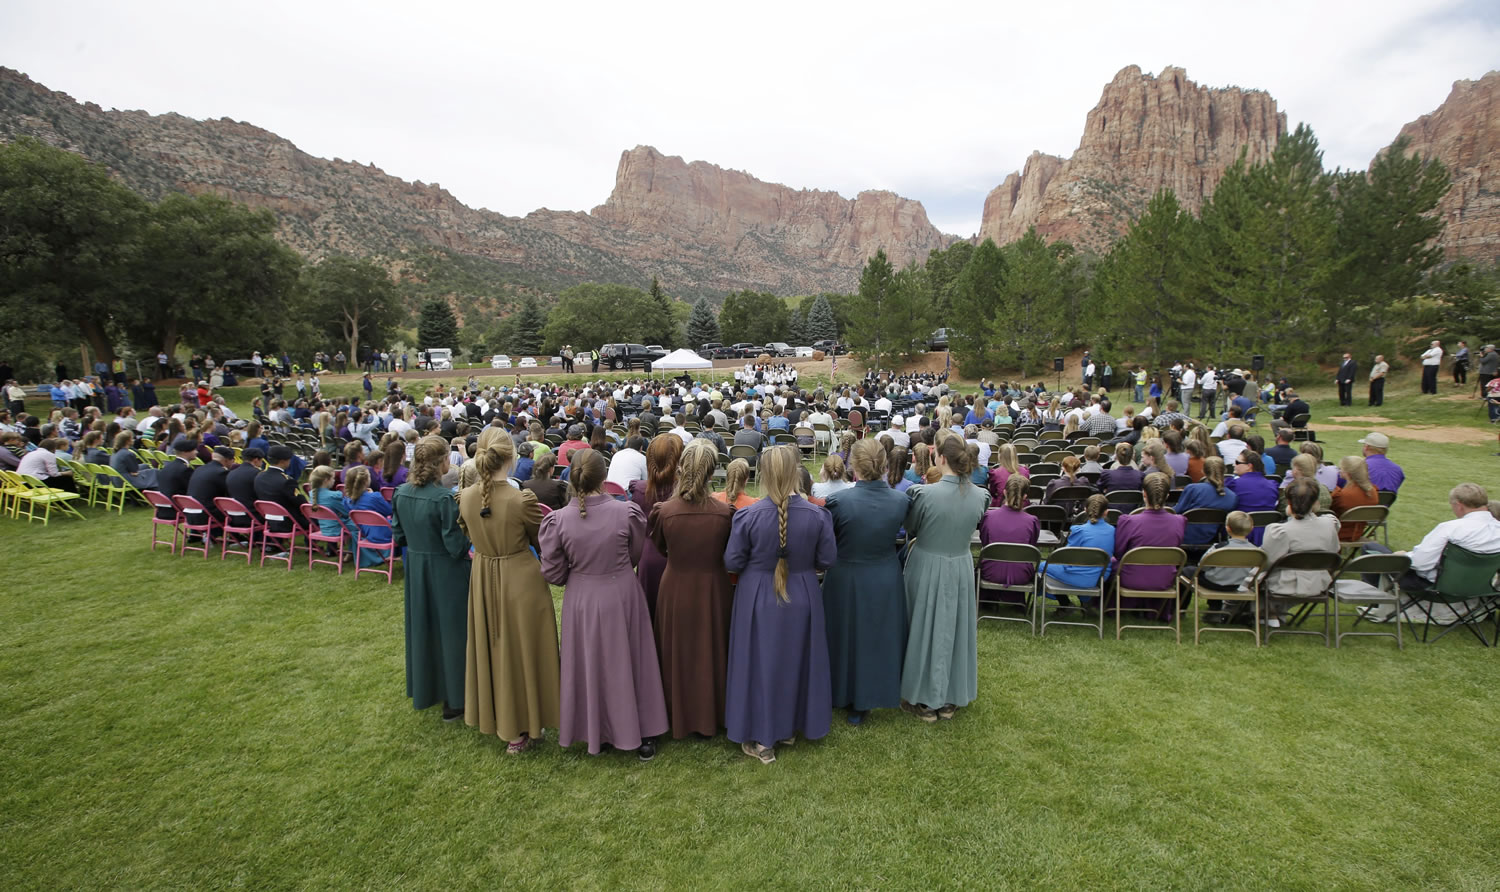 Community members from Hildale, Utah, and Colorado City, Ariz., attend a memorial service Saturday in Hildale for 12 women and children swept away in a deadly flash flood nearly two weeks earlier on the Utah-Arizona border. One 6-year-old boy is still missing.